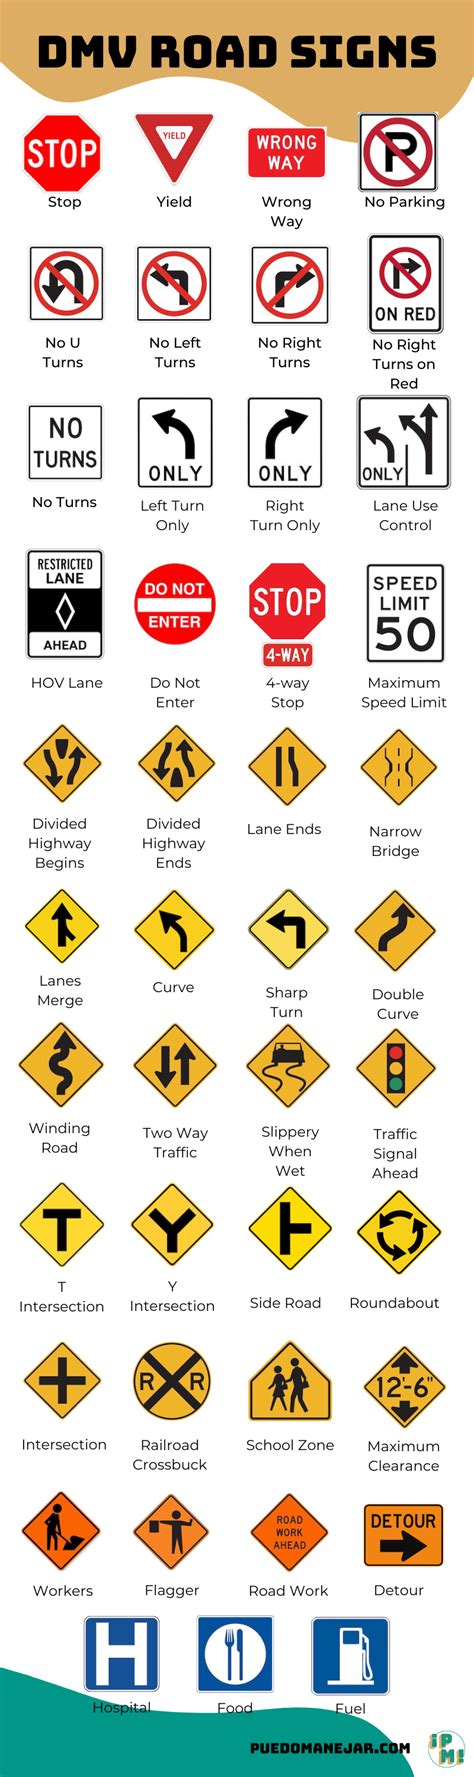 FREE Florida permit test written test Road signs and road rules